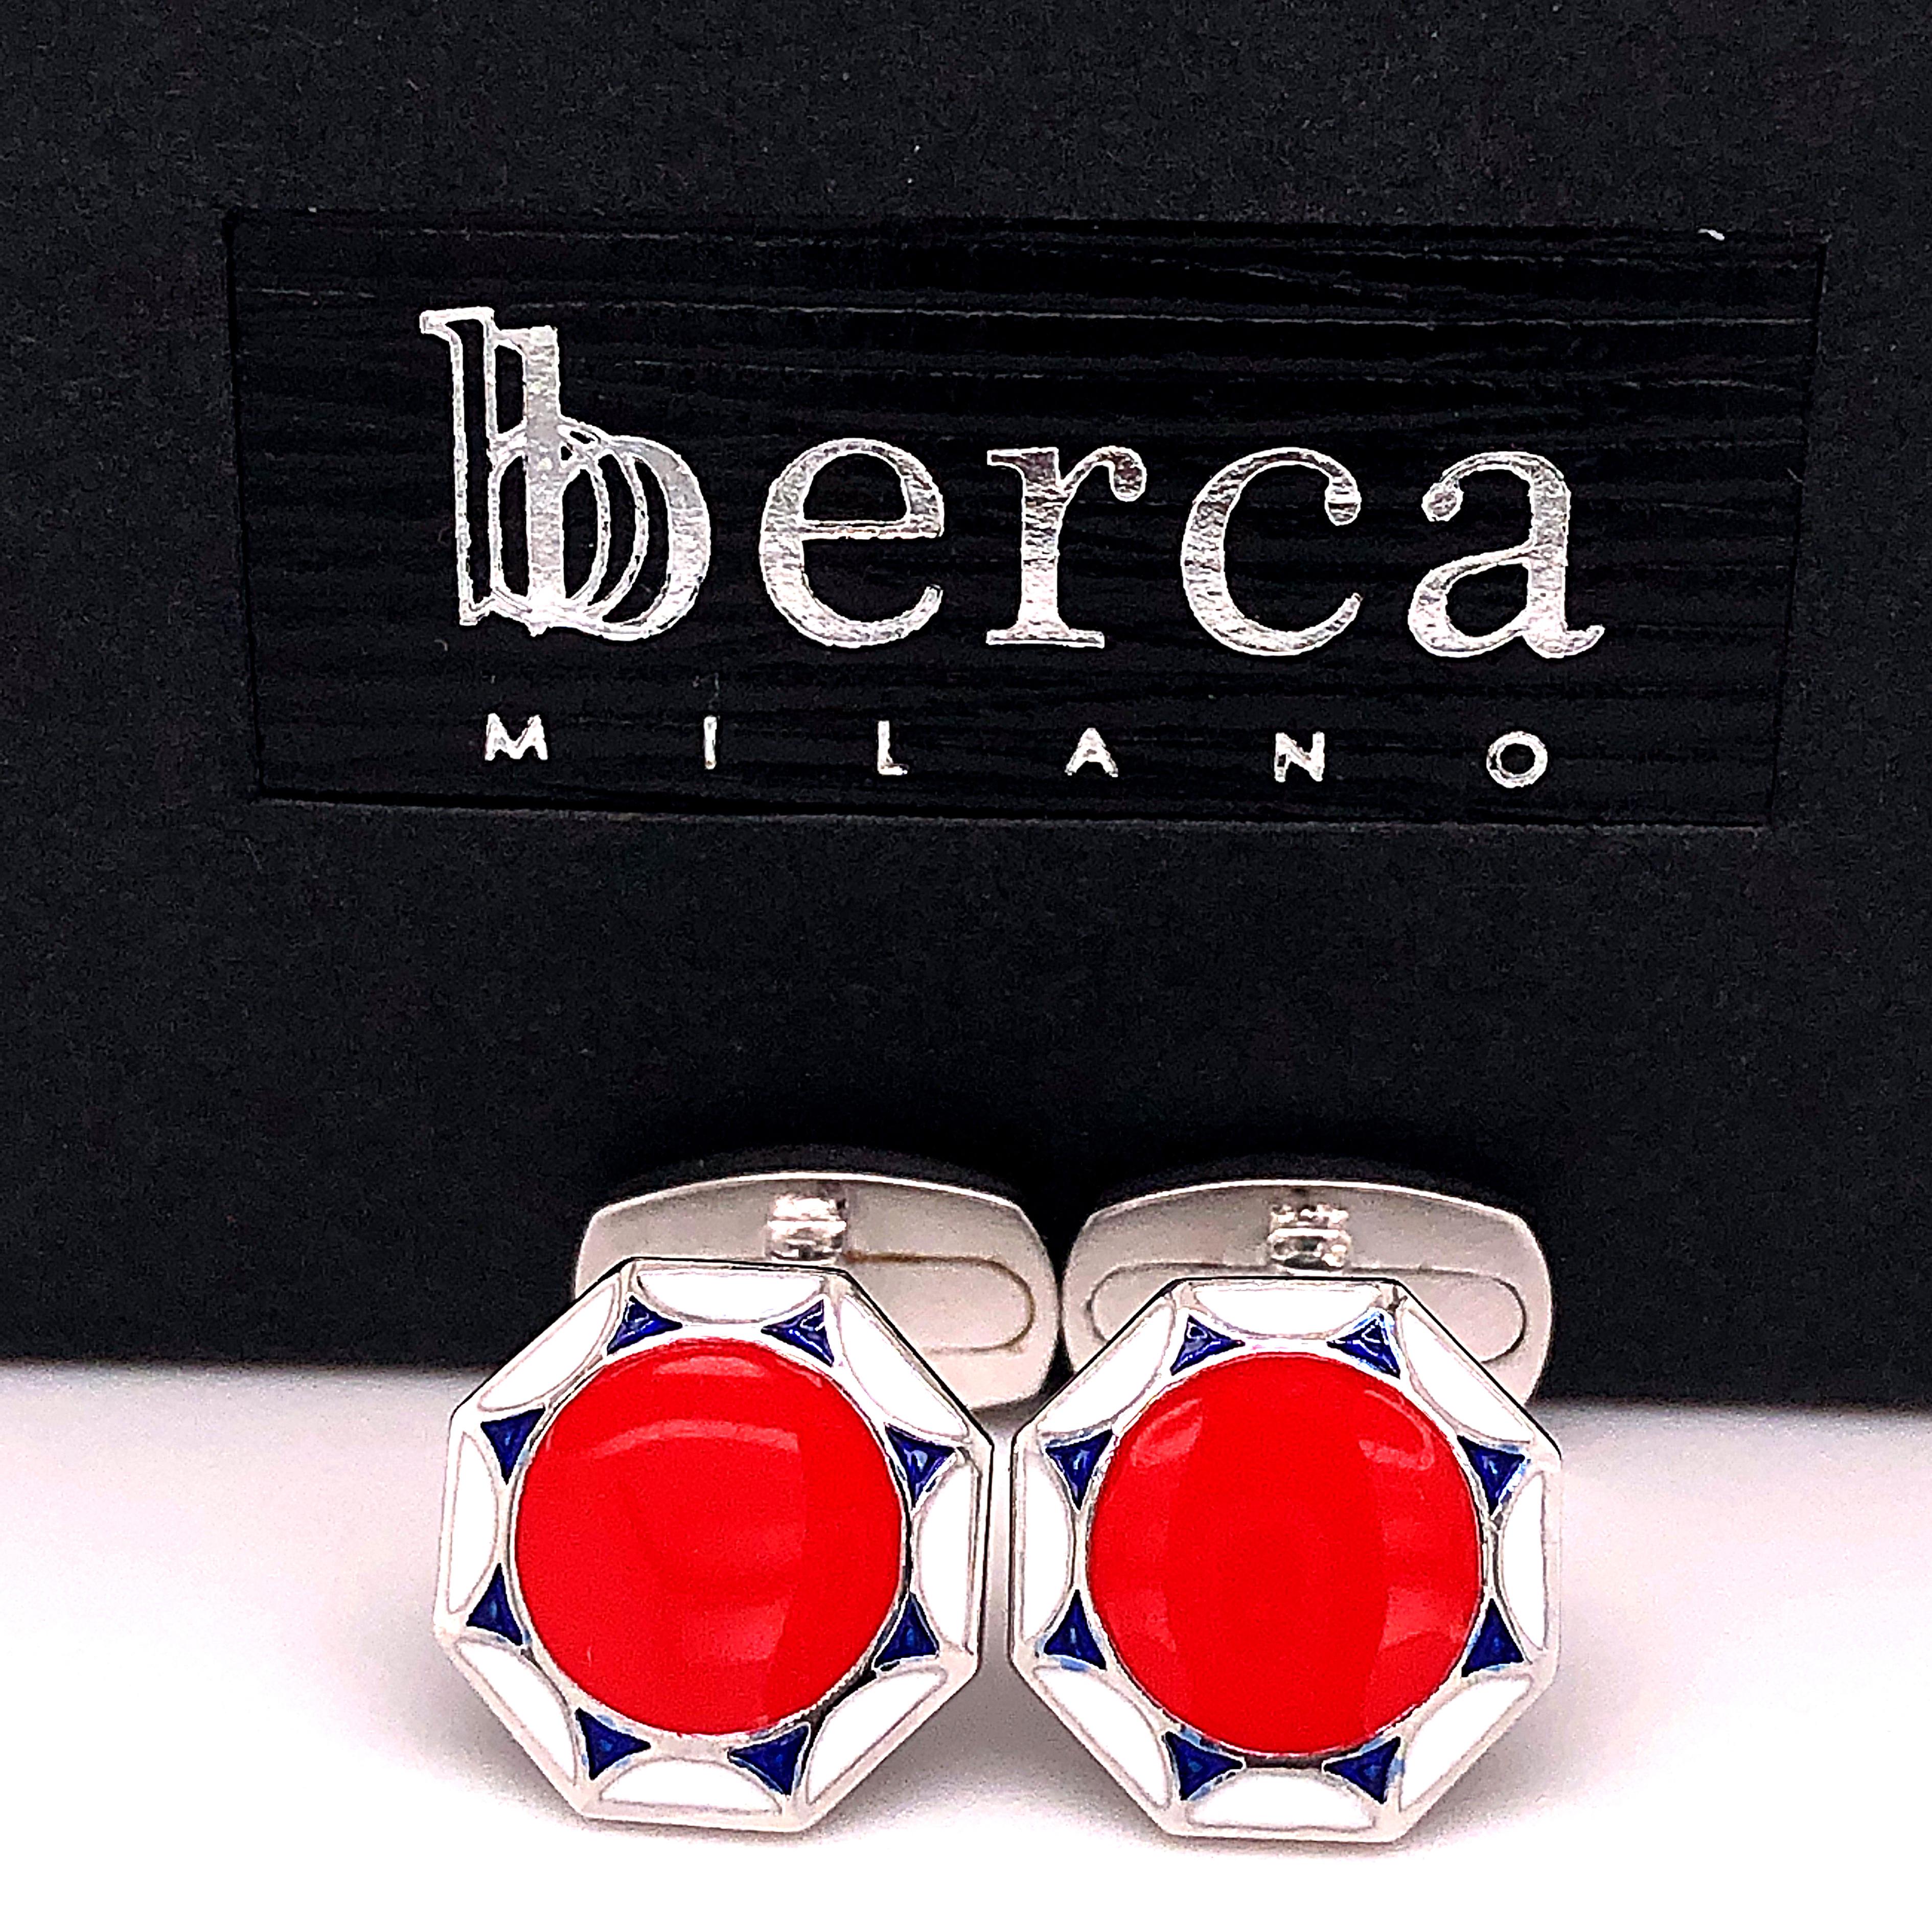 Chic yet Timeless Octagonal White, Navy Blue, Light Blue Hand Enamelled Sterling Silver Cufflinks, T-bar back.
In our Smart Black Box and Pouch.

Front Diameter about 0.55 inches.